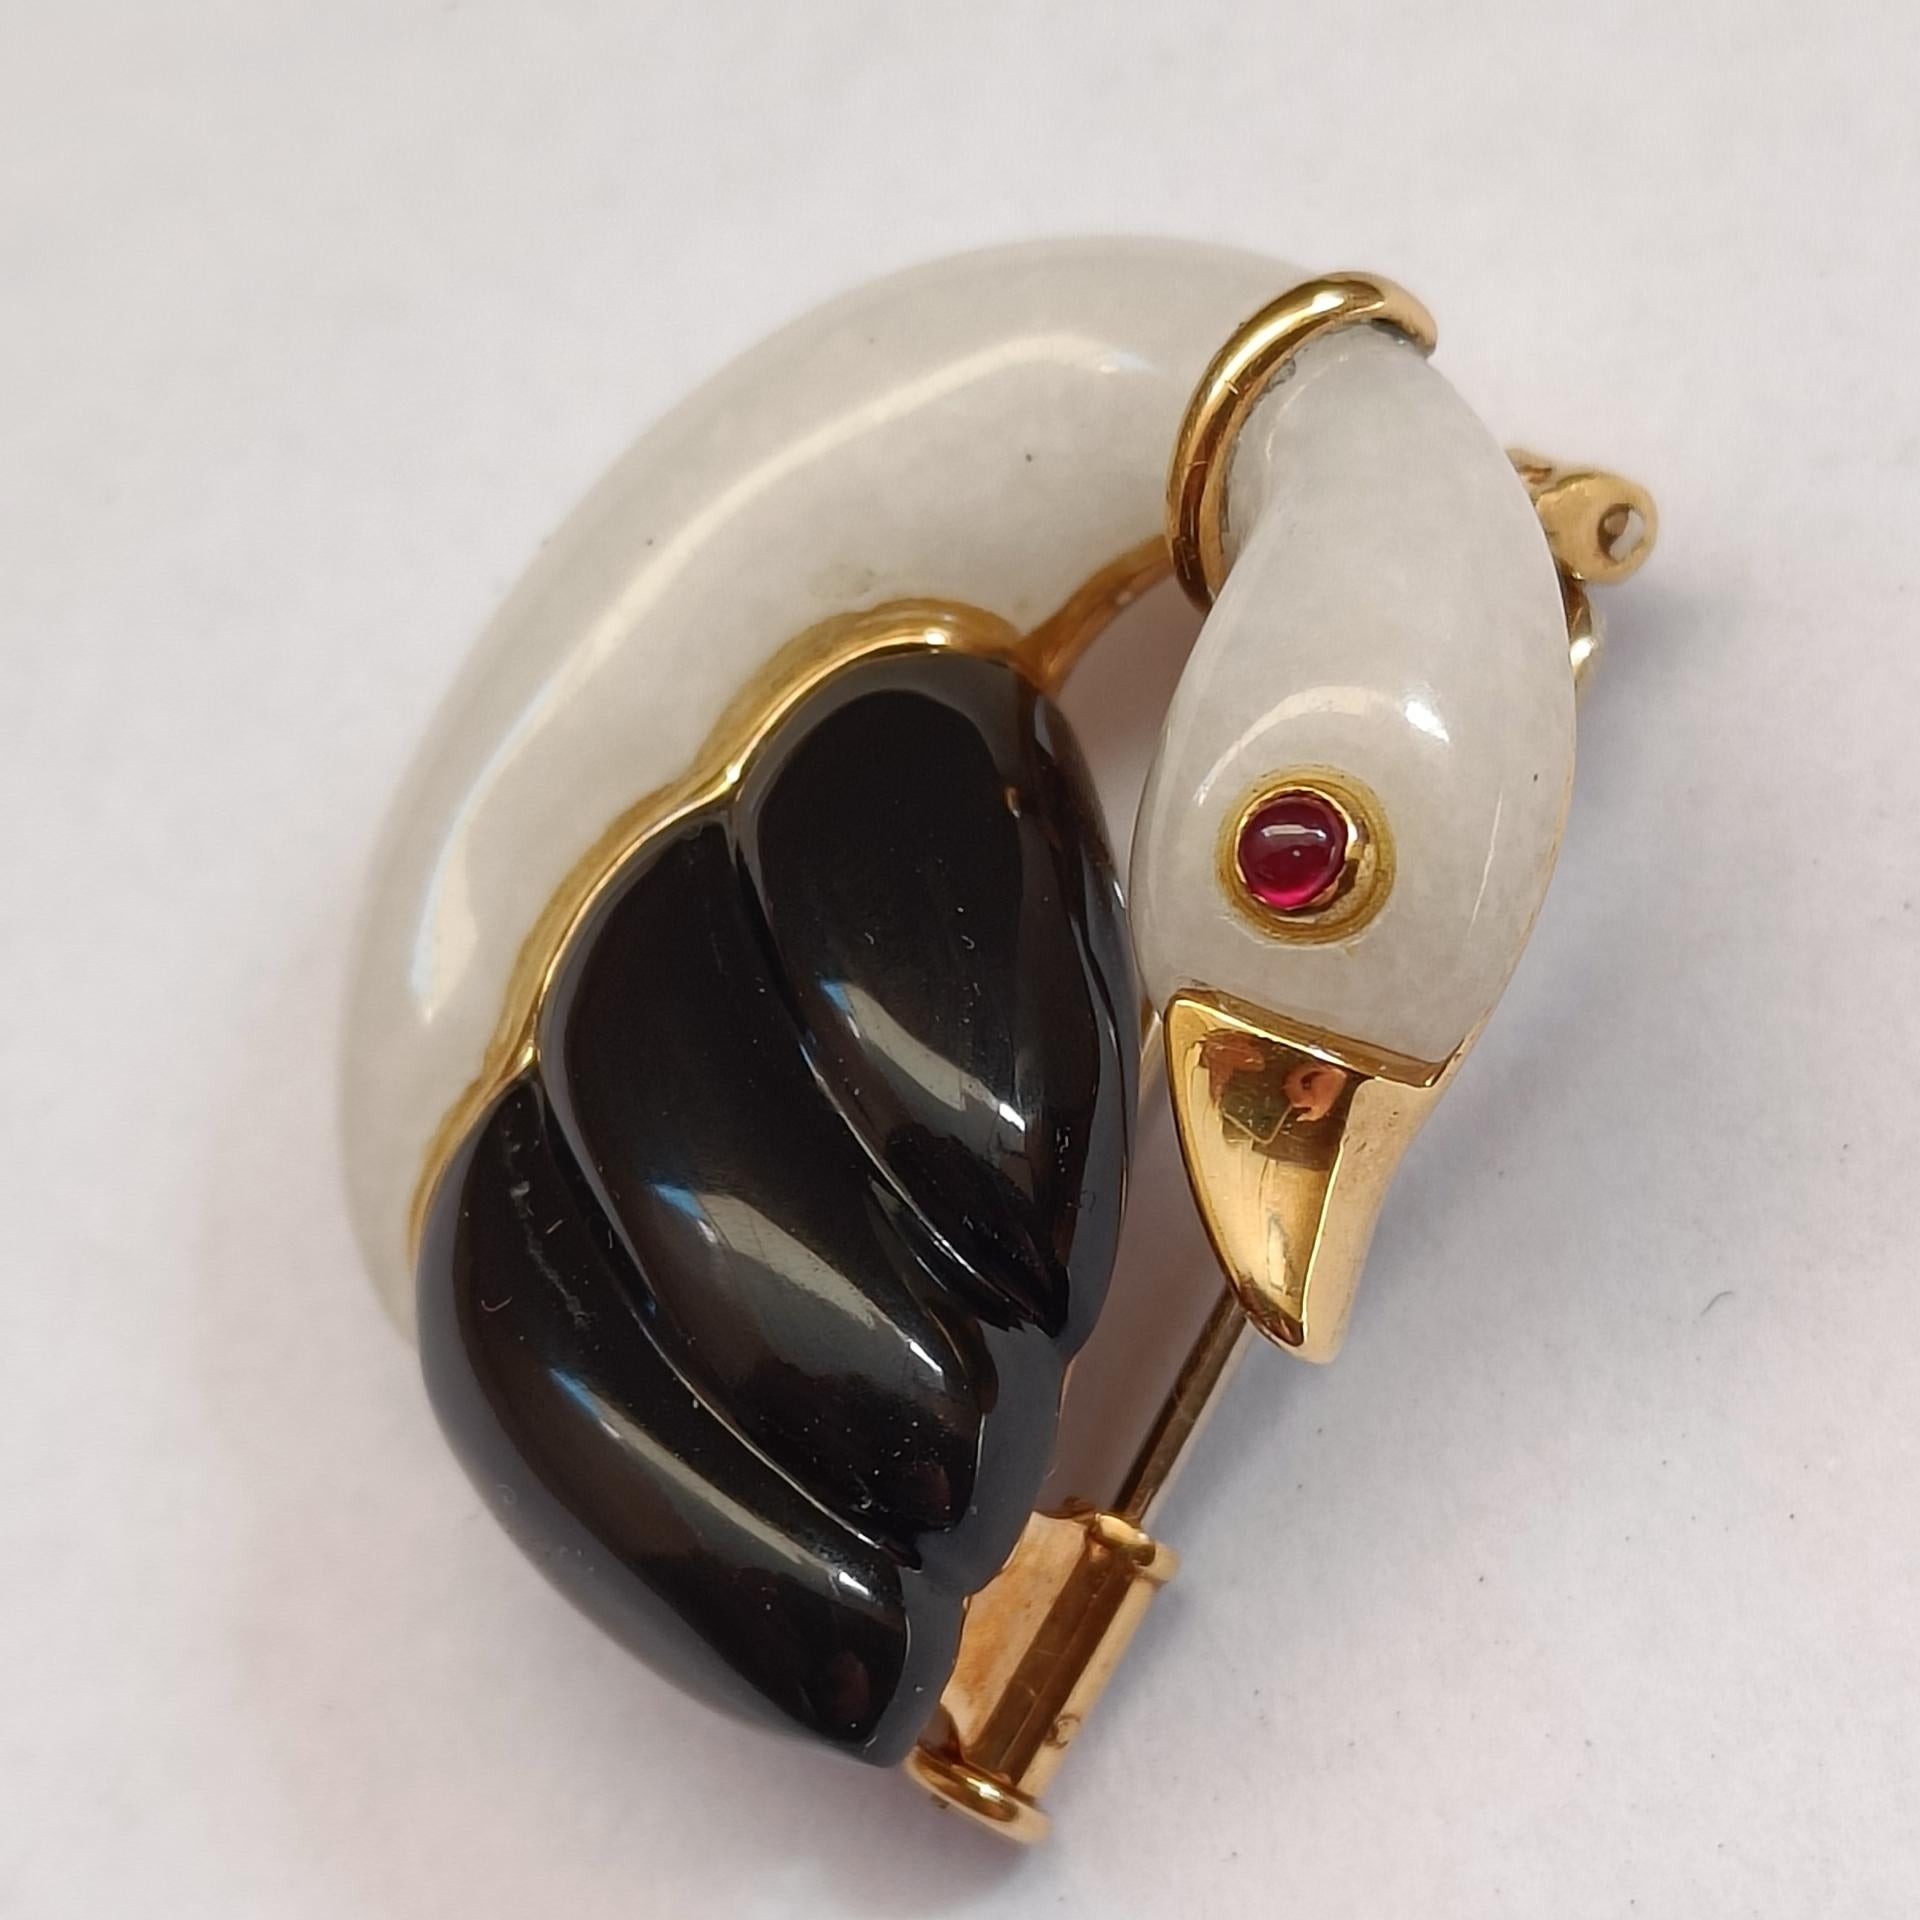 Modern 18k Gold Swan Brooch with Ruby, Chalcedony and Onyx - Vintage Animal Pin Brooch For Sale